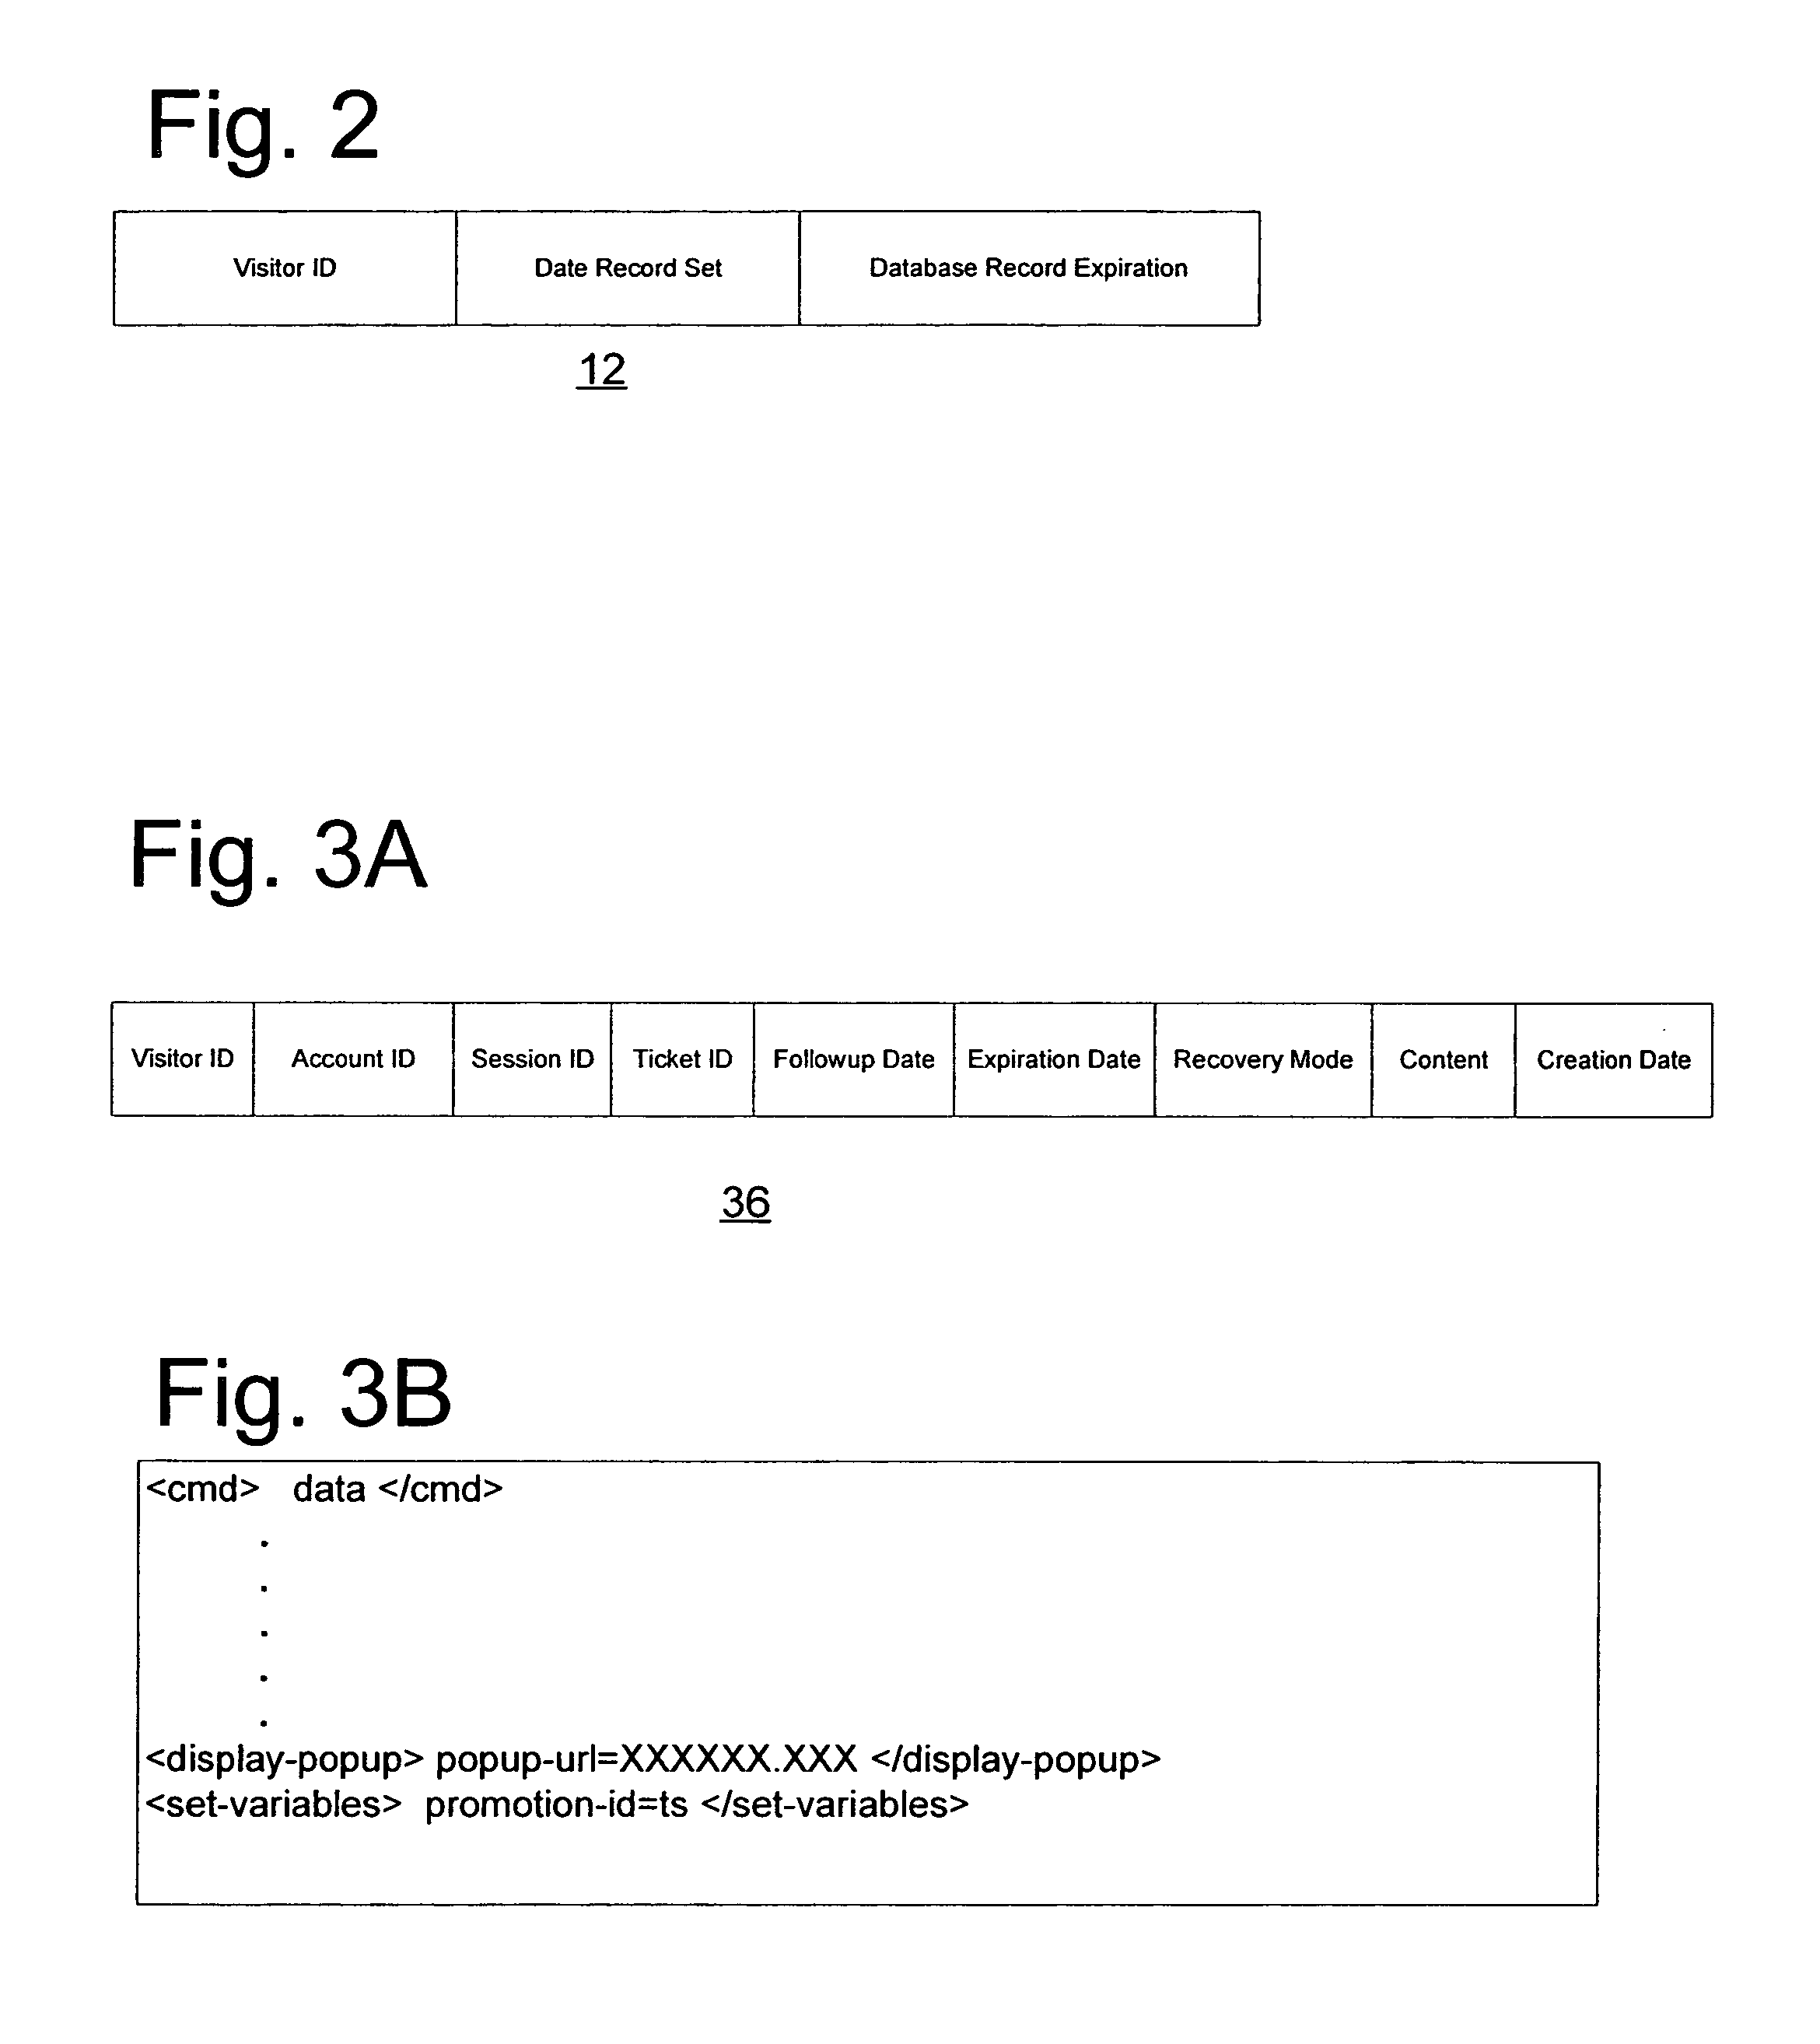 System and method for performing follow up based on user interactions